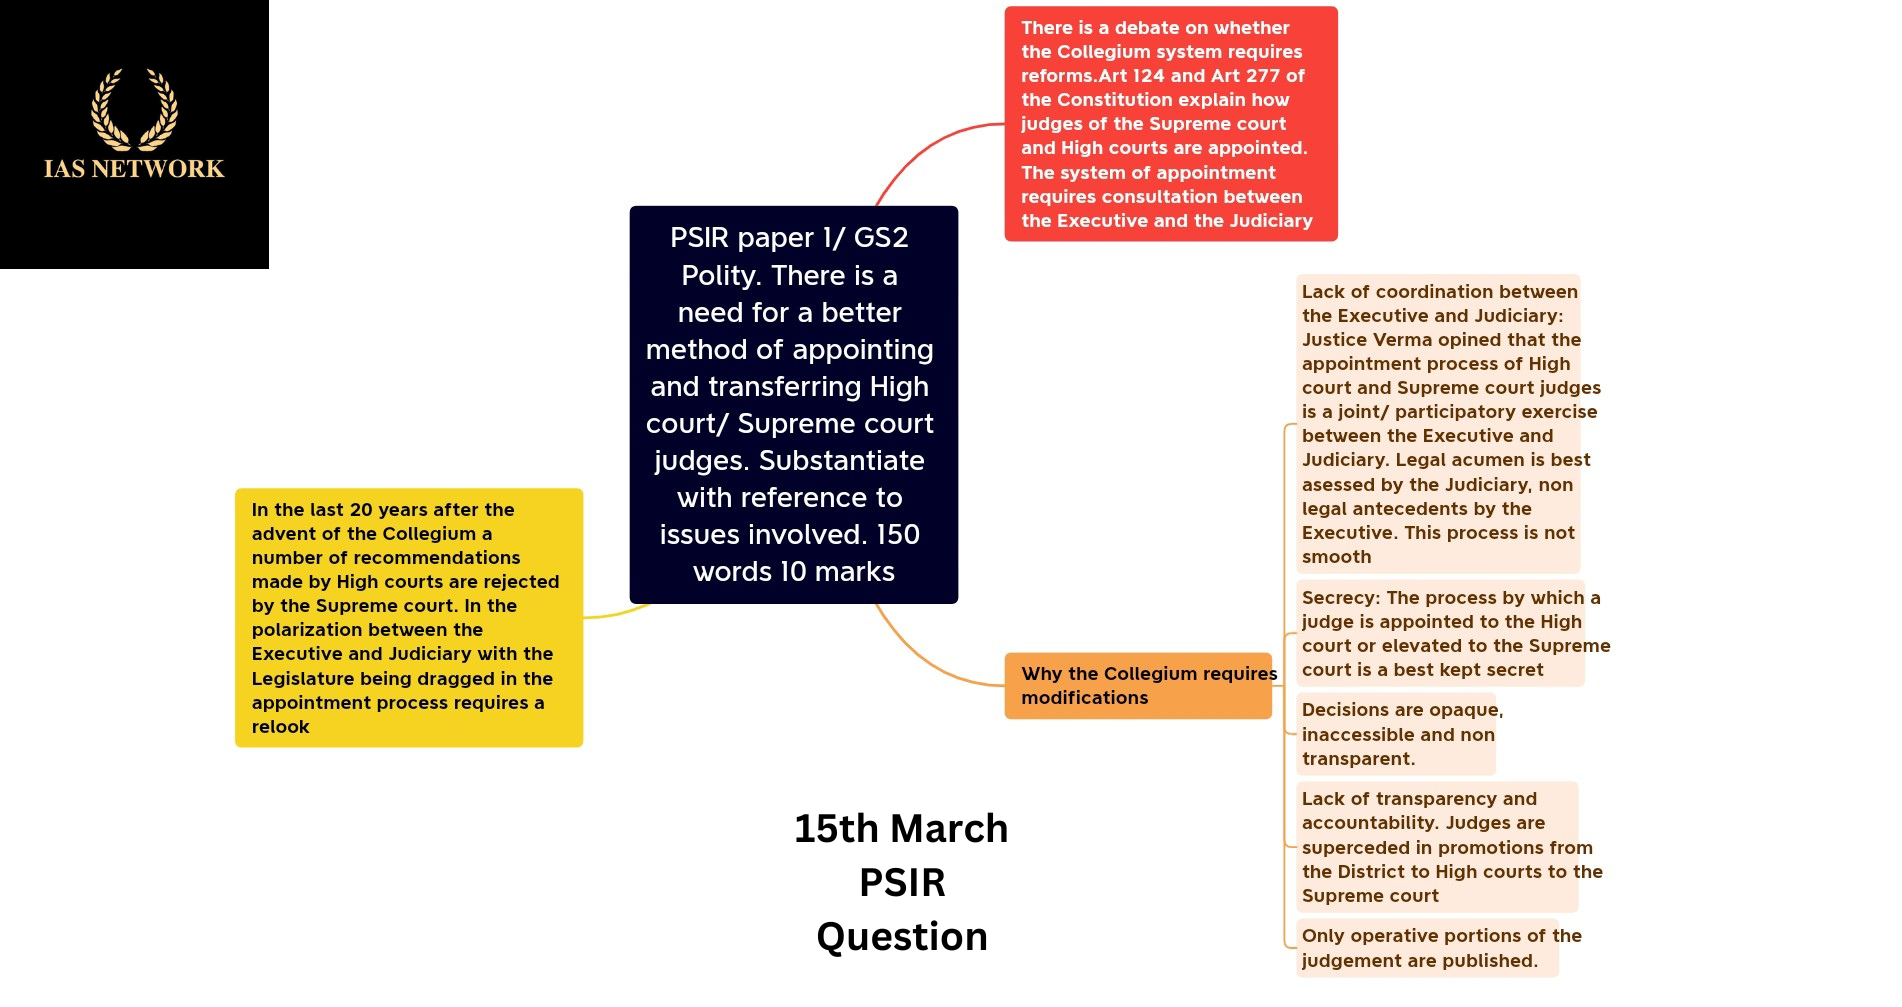 IAS NETWORK 15th MARCH PSIR QUESTION